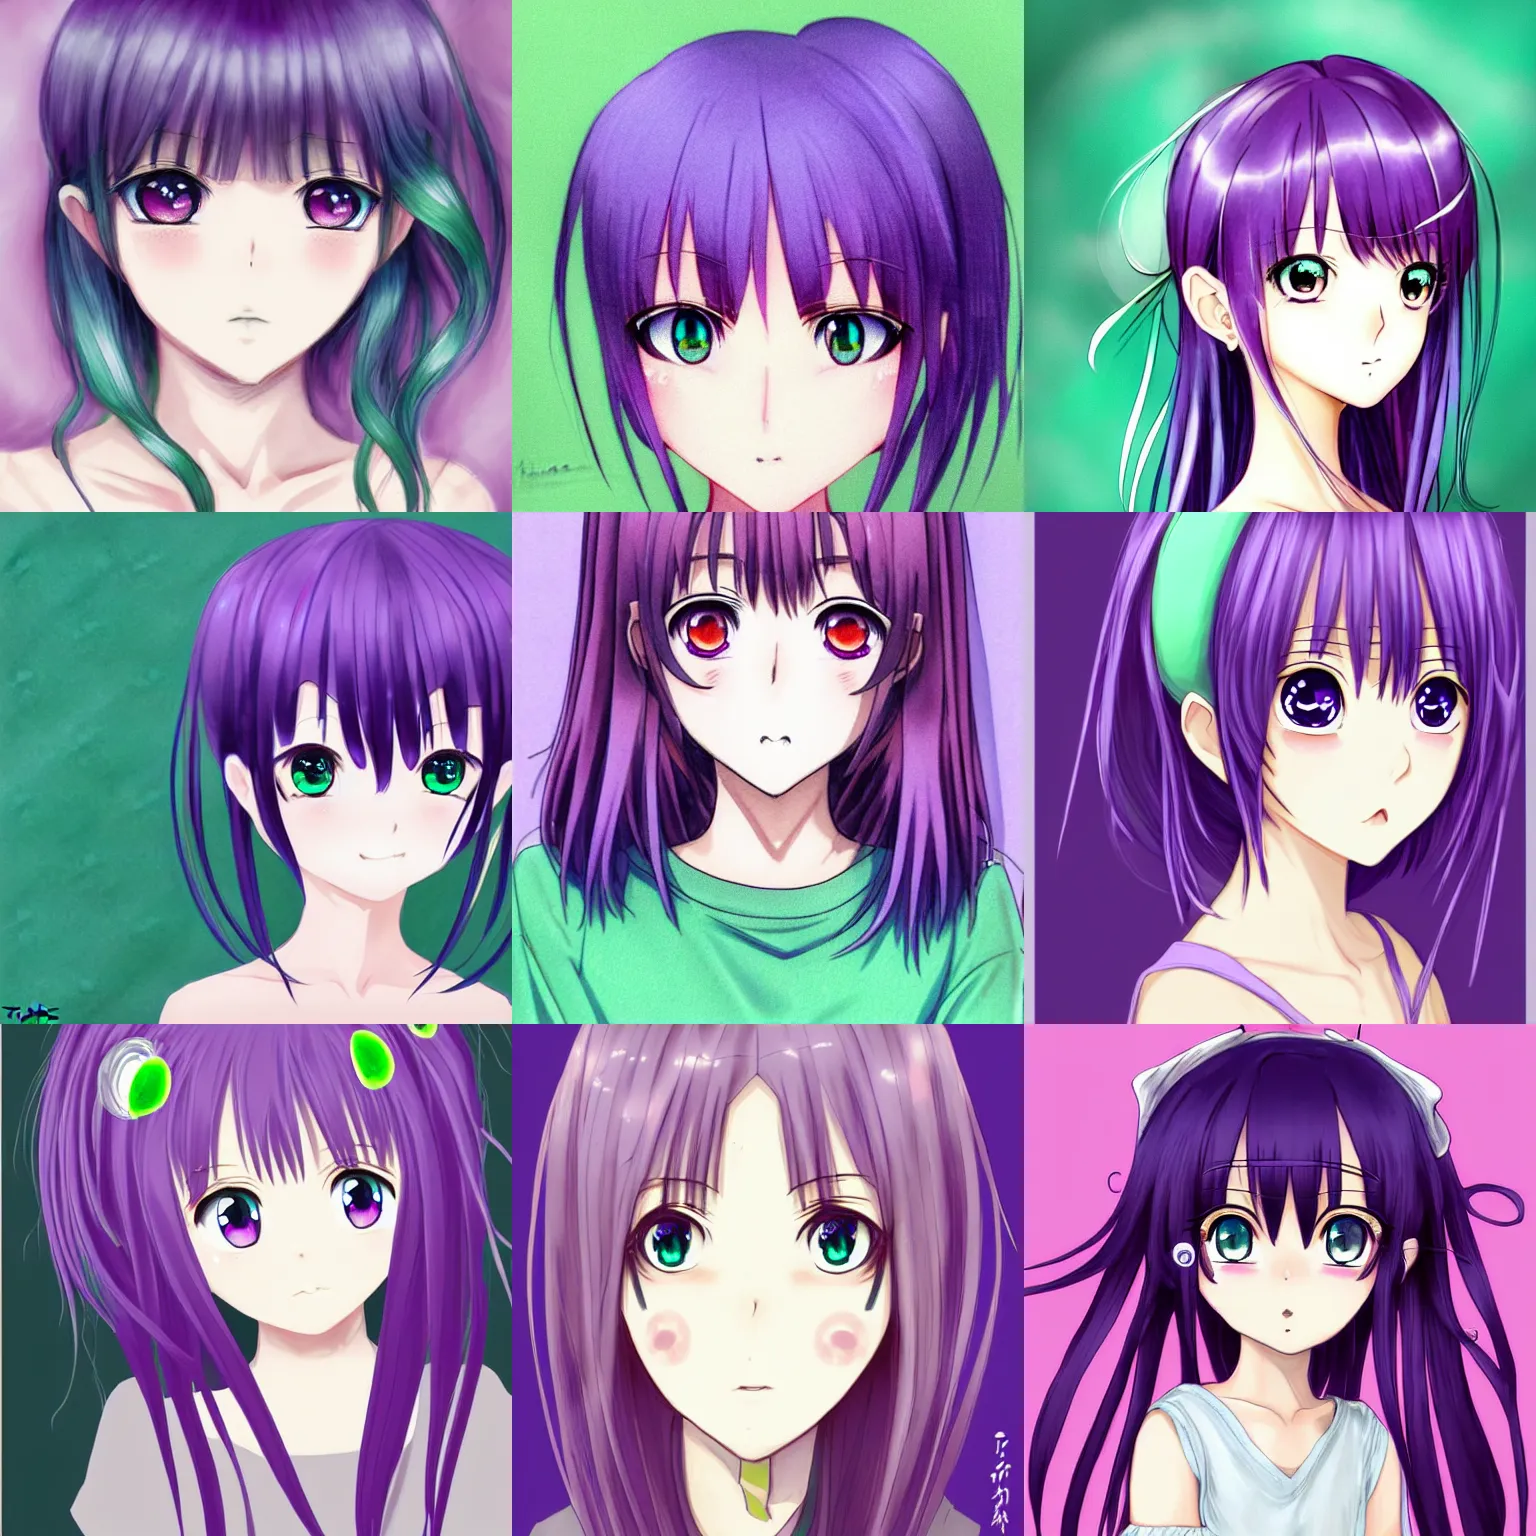 Hair in Anime - Colors and Hairstyles and their meanings